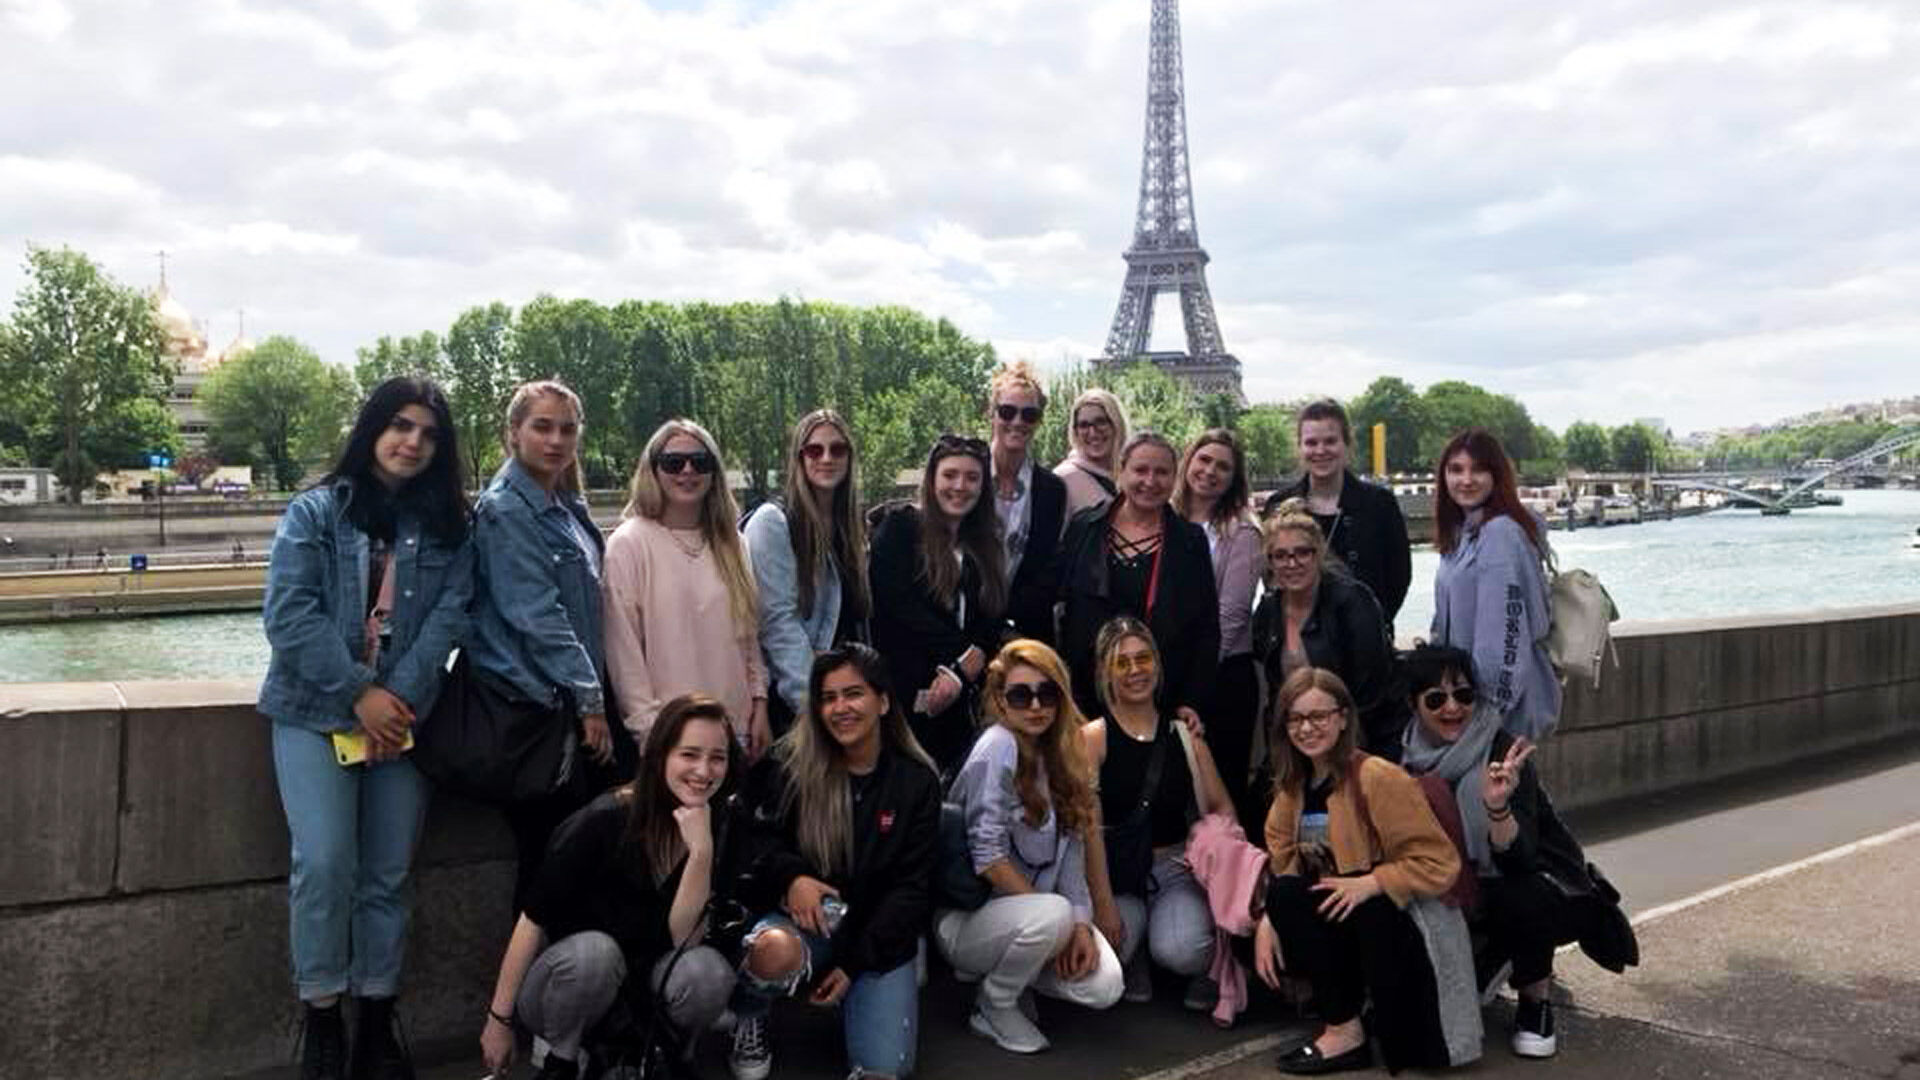 A group of tourists with the Eiffel Tower in the background, enjoying a sunny day by the Seine River in Paris.